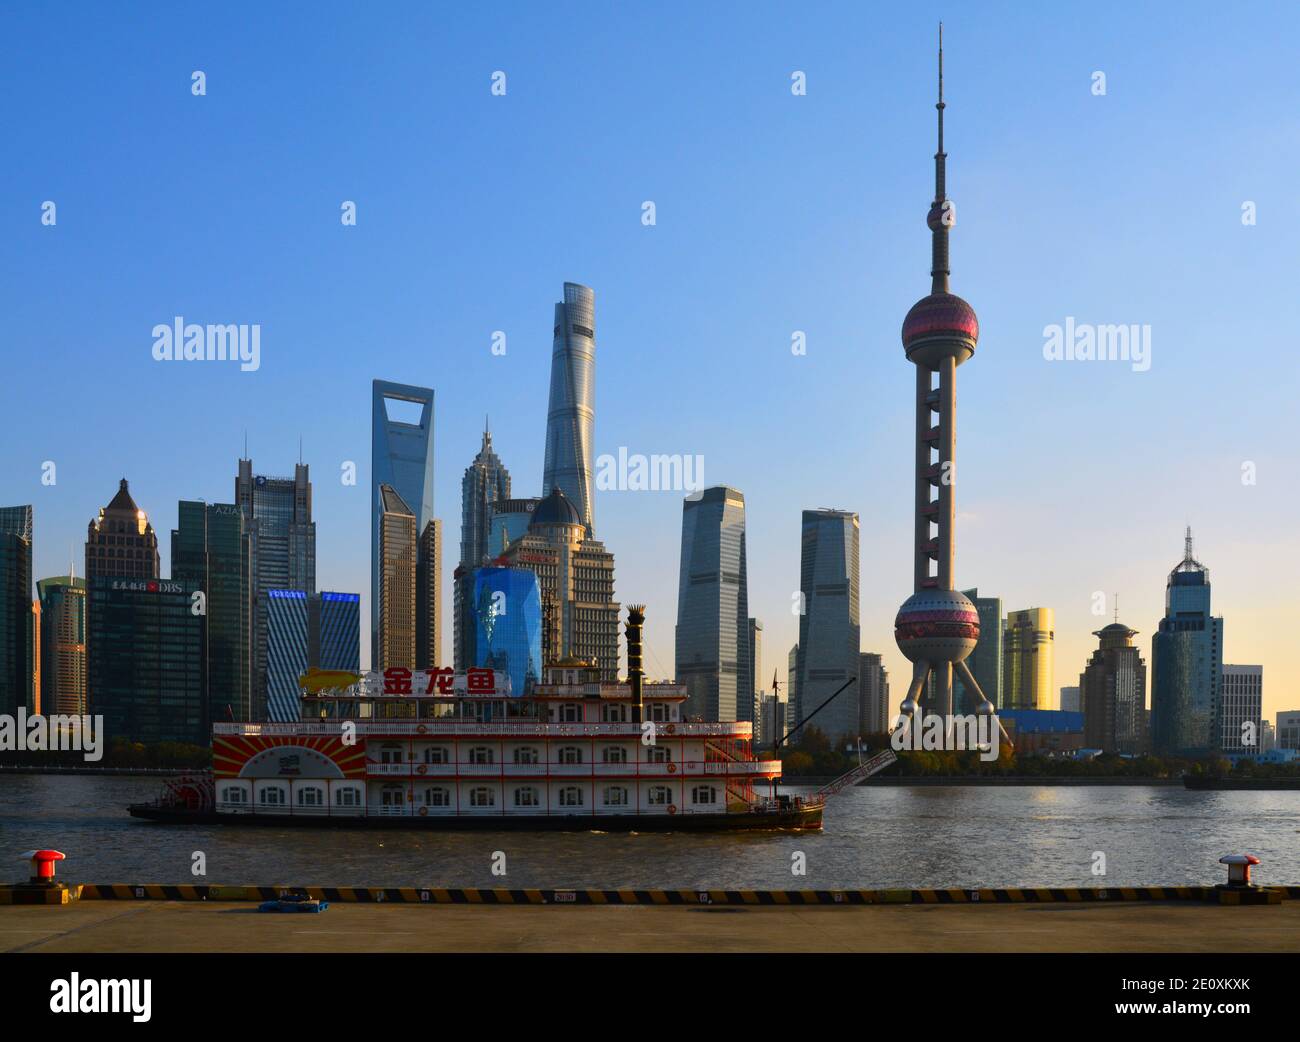 Old And The New Boat Passing In Front Of The Pudong Skyline In Shanghai Jan 21 Stock Photo Alamy